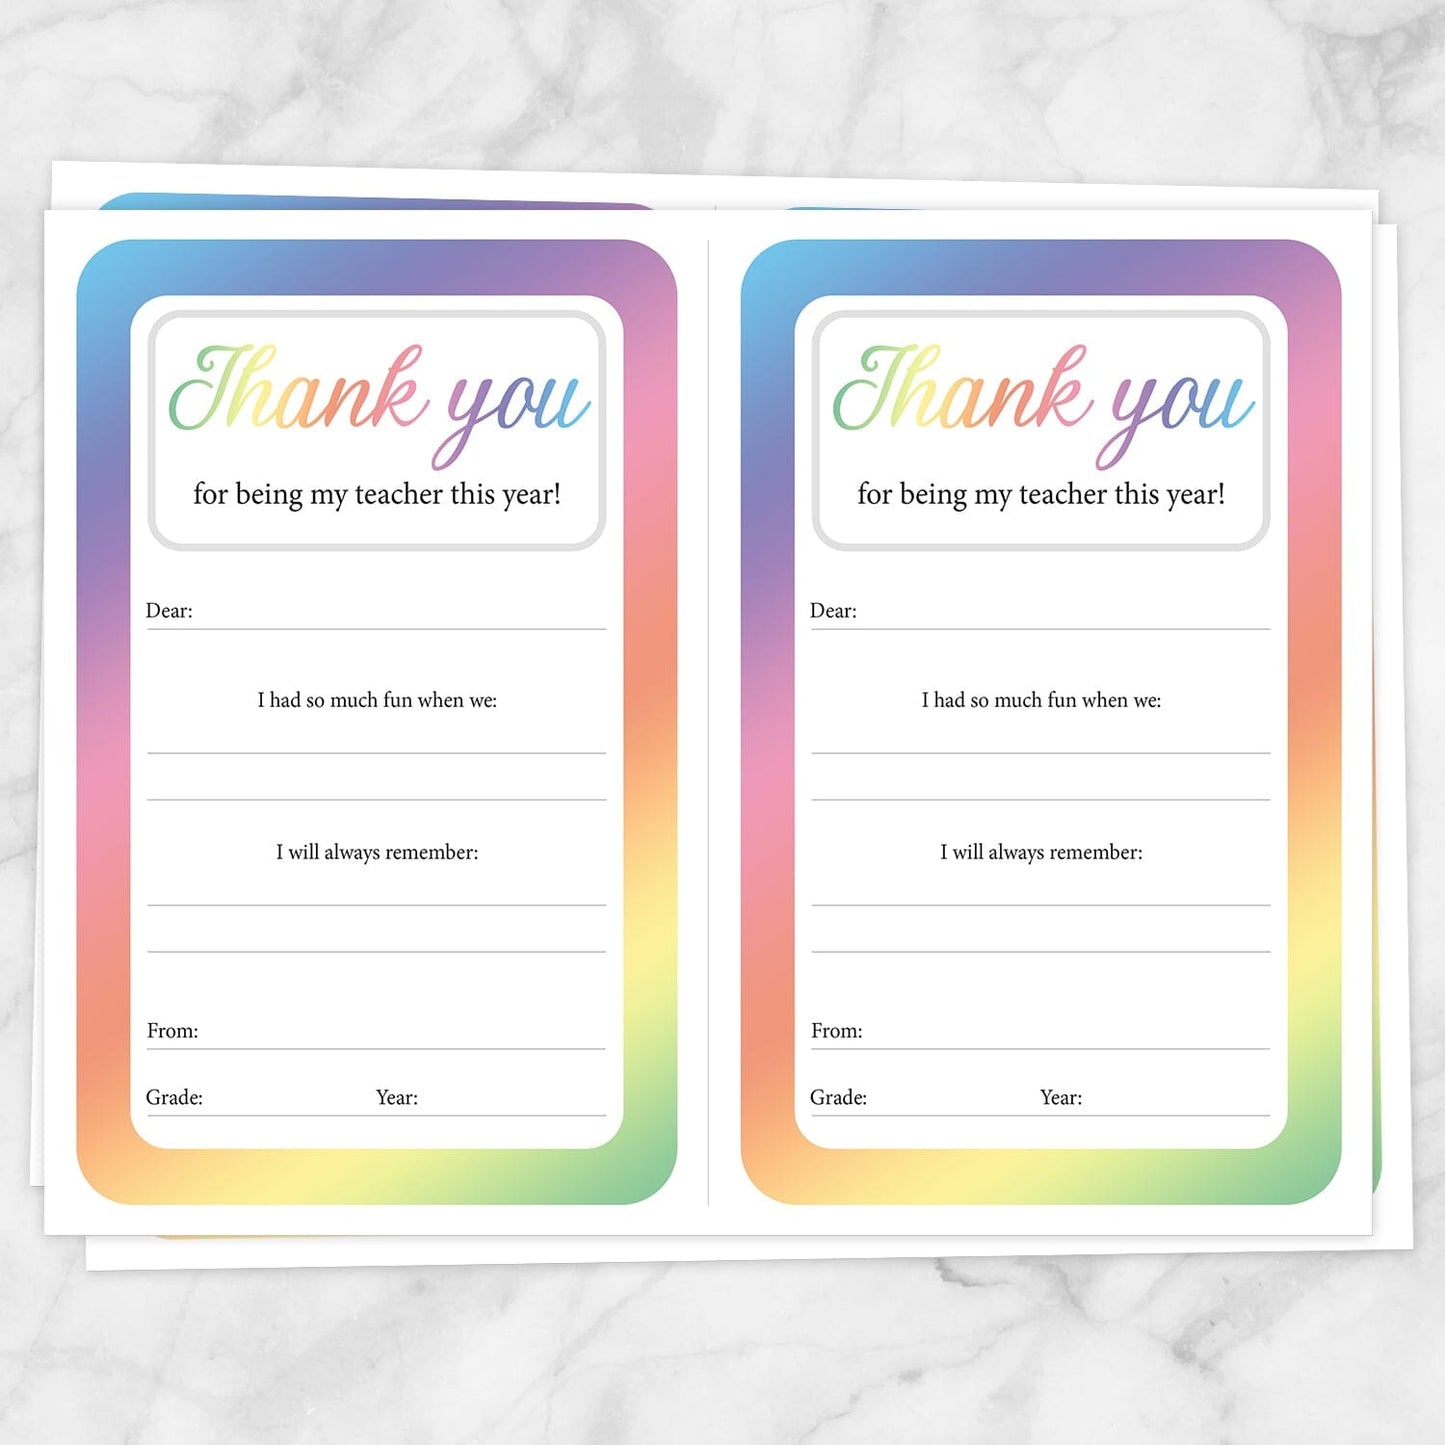 Printable Colorful Teacher Thank You Notes at Printable Planning. Sheet of 2 thank you notes.